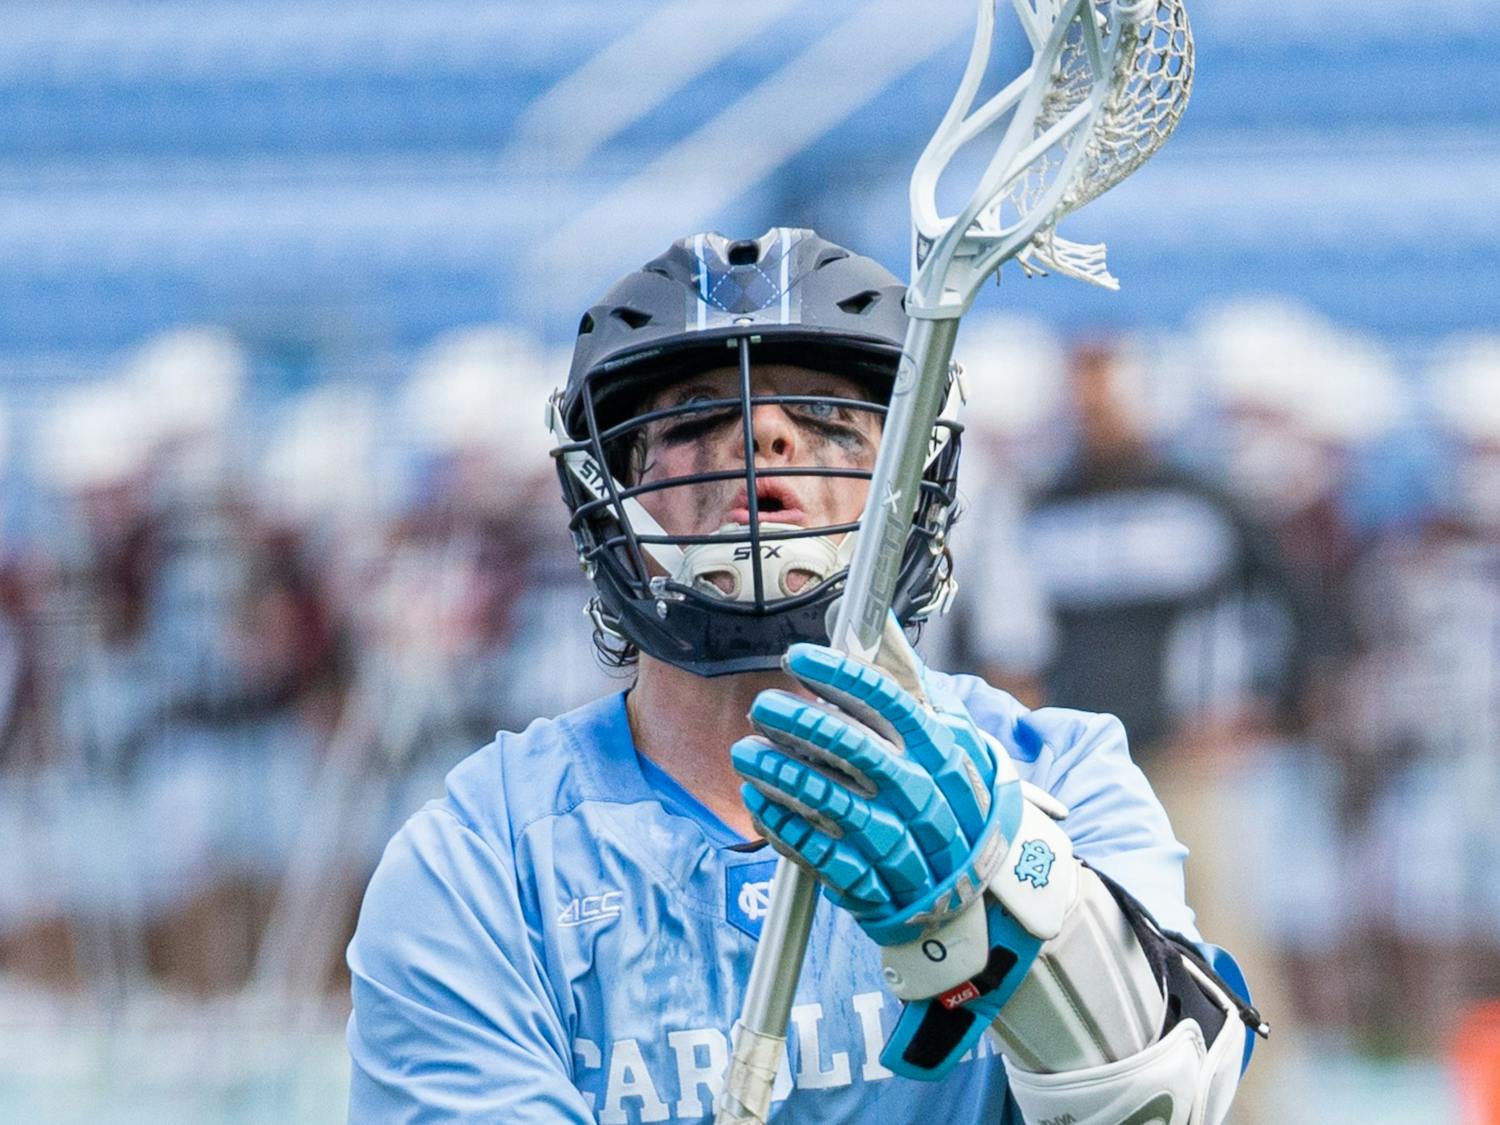 Junior attackman Lance Tillman (0) prepares to catch a pass during a men's lacrosse game in Dorrance Stadium against Brown University on Wednesday, Feb. 23, 2022. UNC won 14-11.